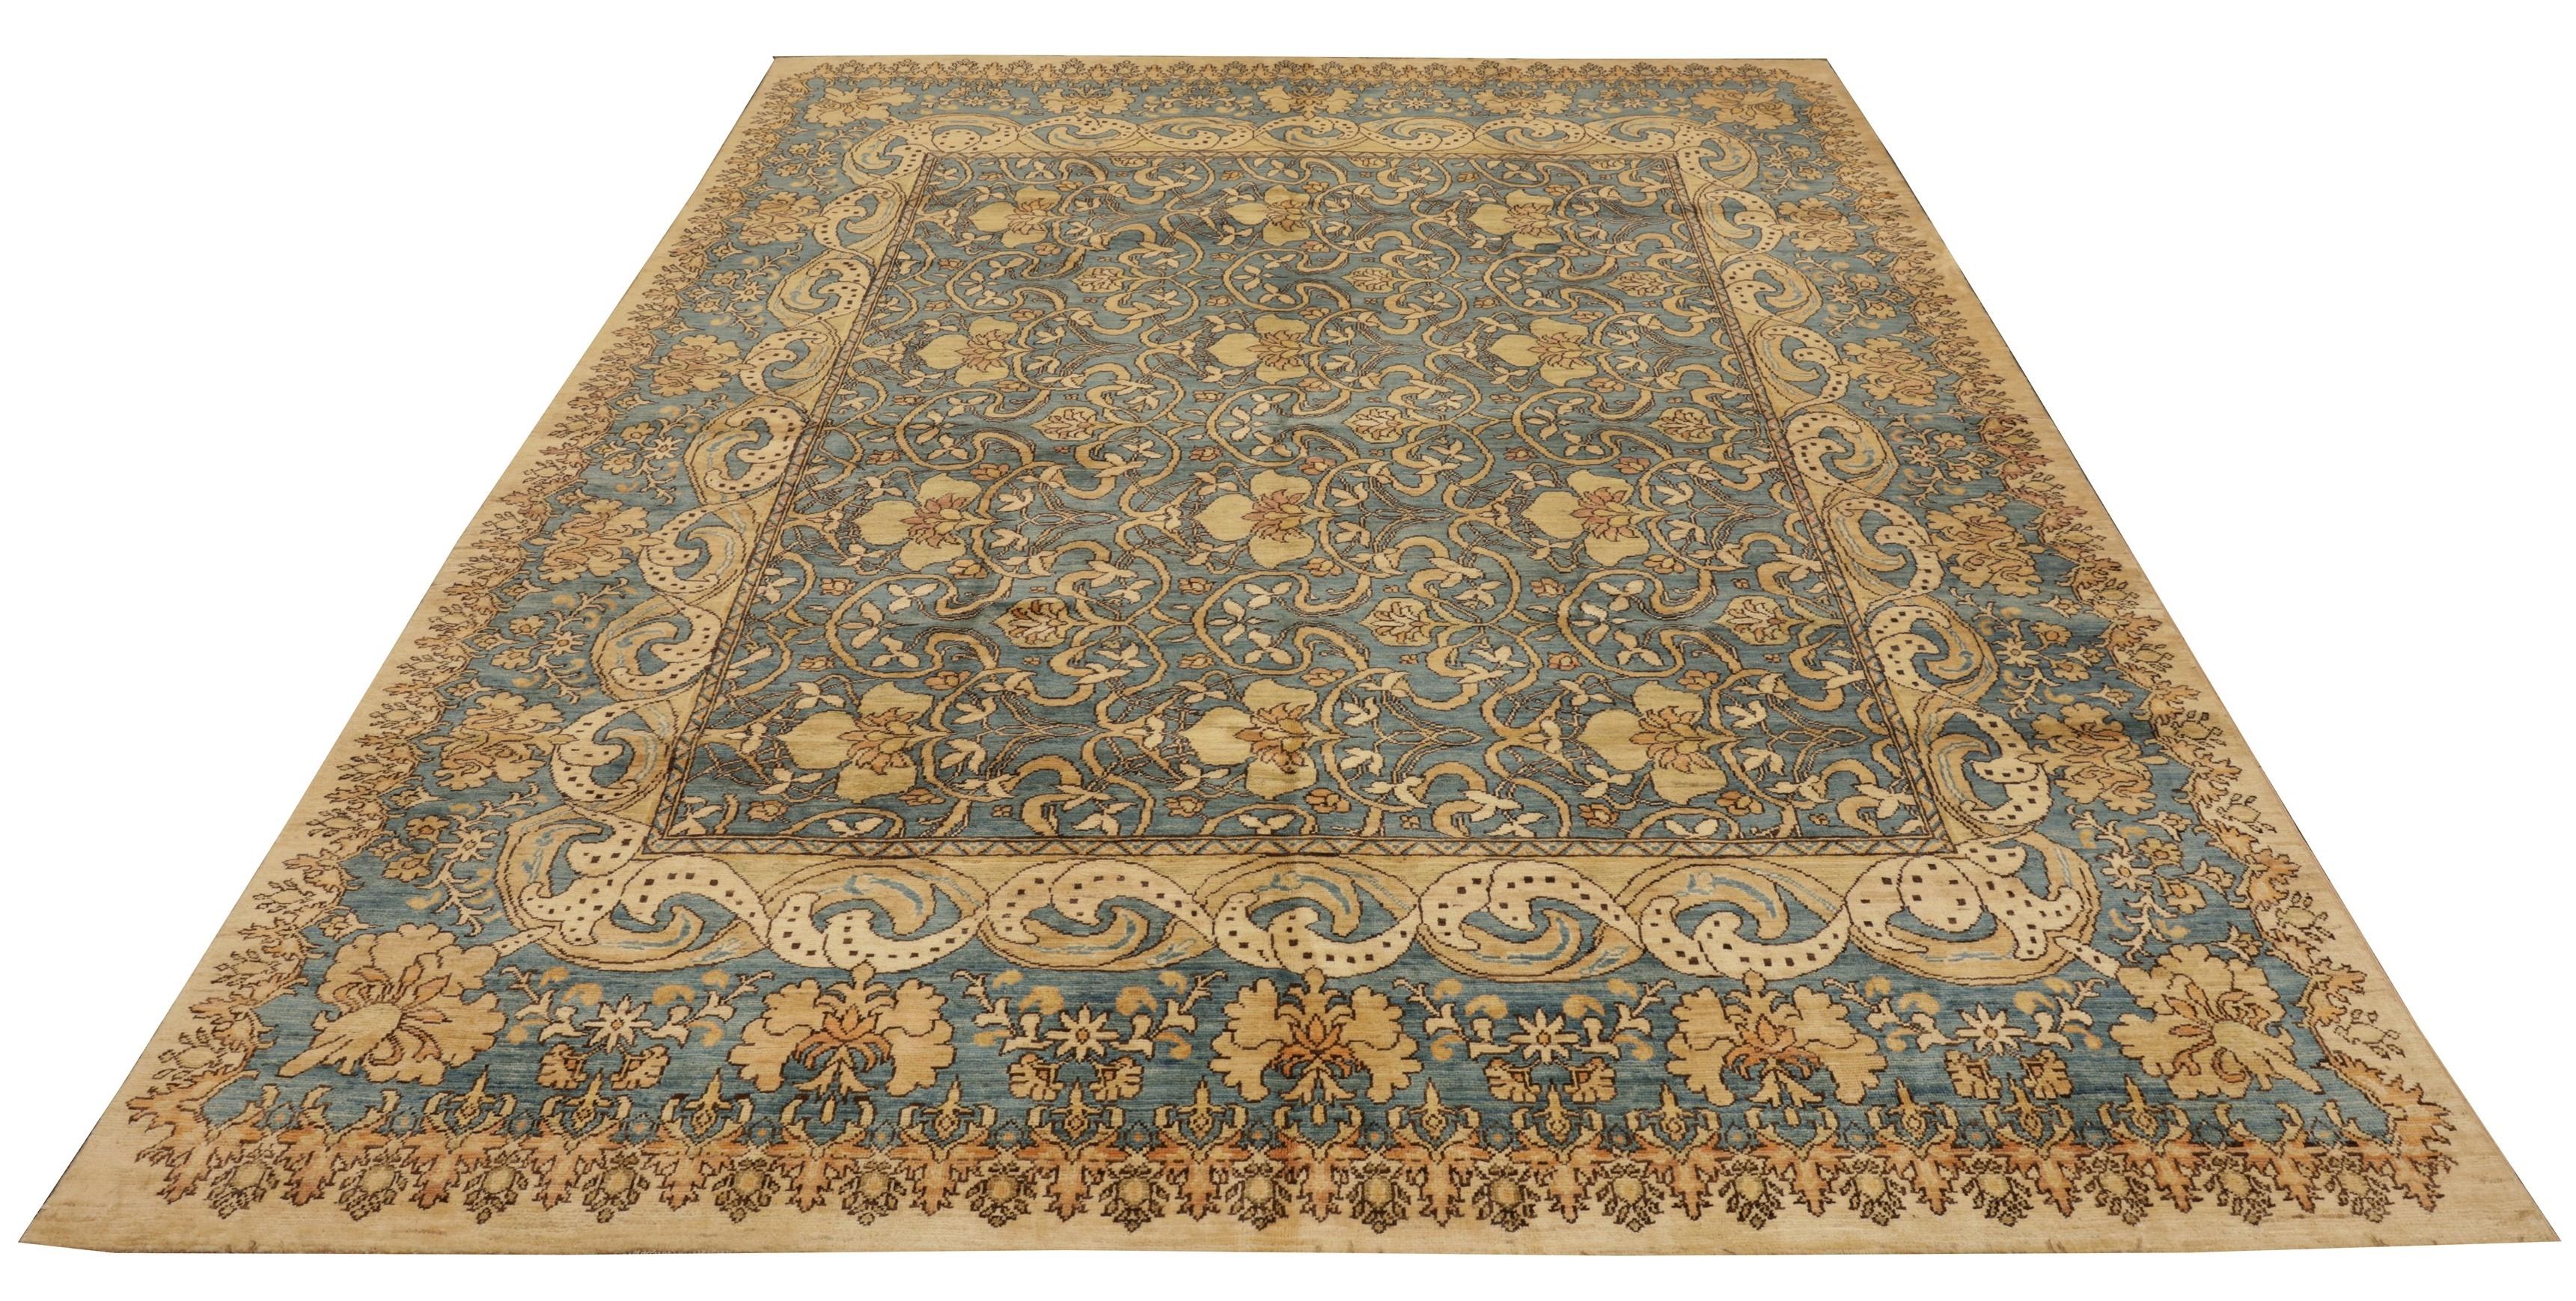 This rug, of contemporary production, has a decoration inspired by the Art and Craft movement, born at the end of the 19th century in Great Britain as a reaction of artists and intellectuals to the intense industrialization.
It was the artist